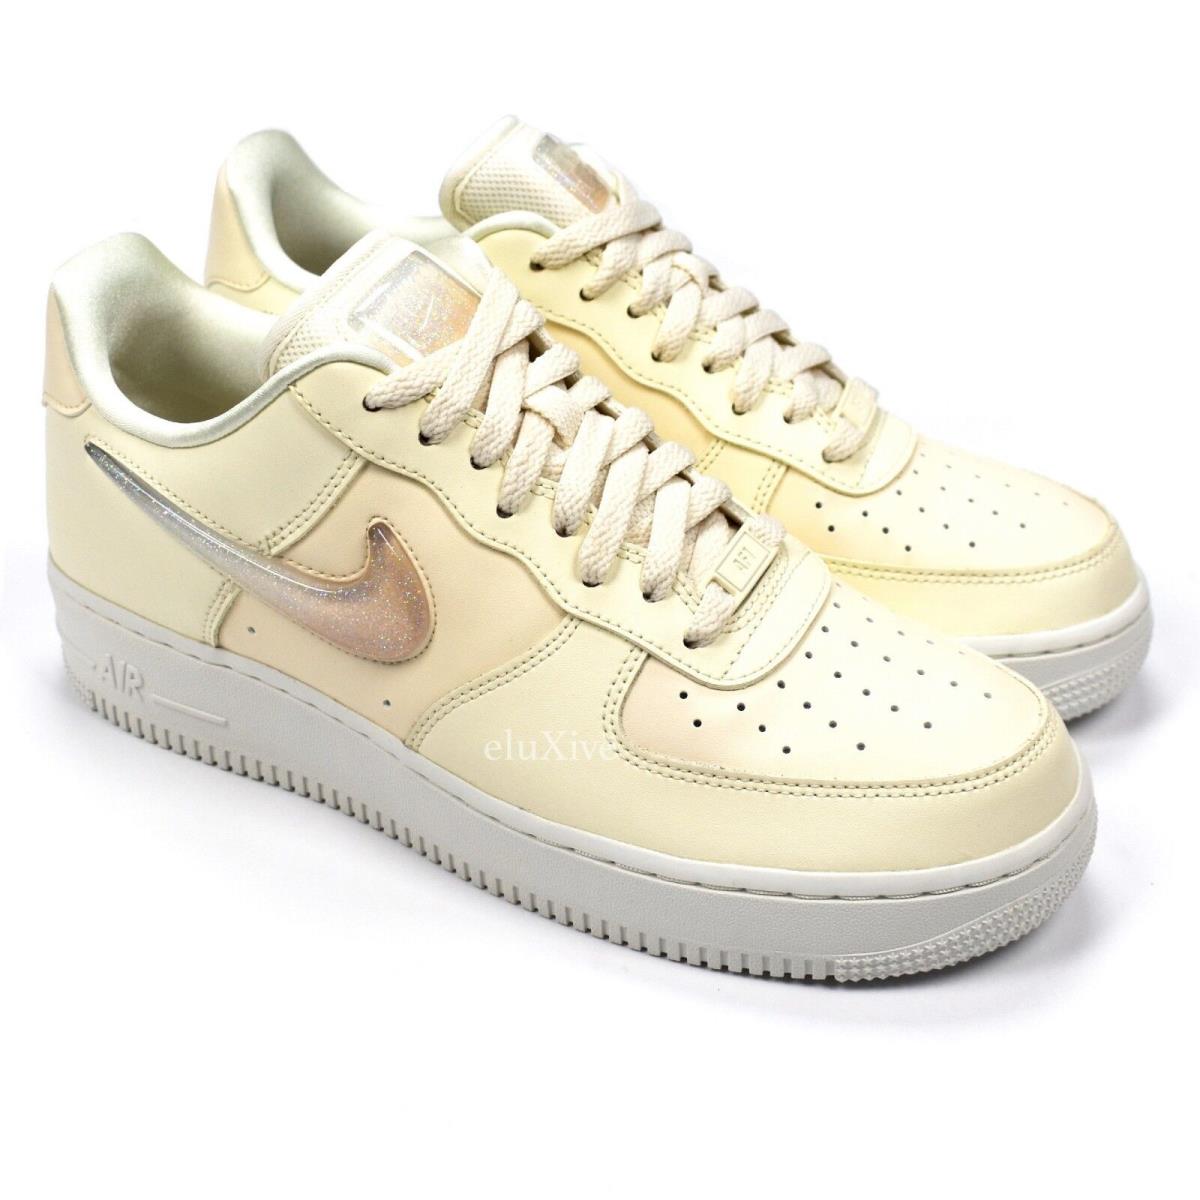 Nike Air Force 1 07 SE Prm Jelly Jewel Swoosh Ivory White Sneakers